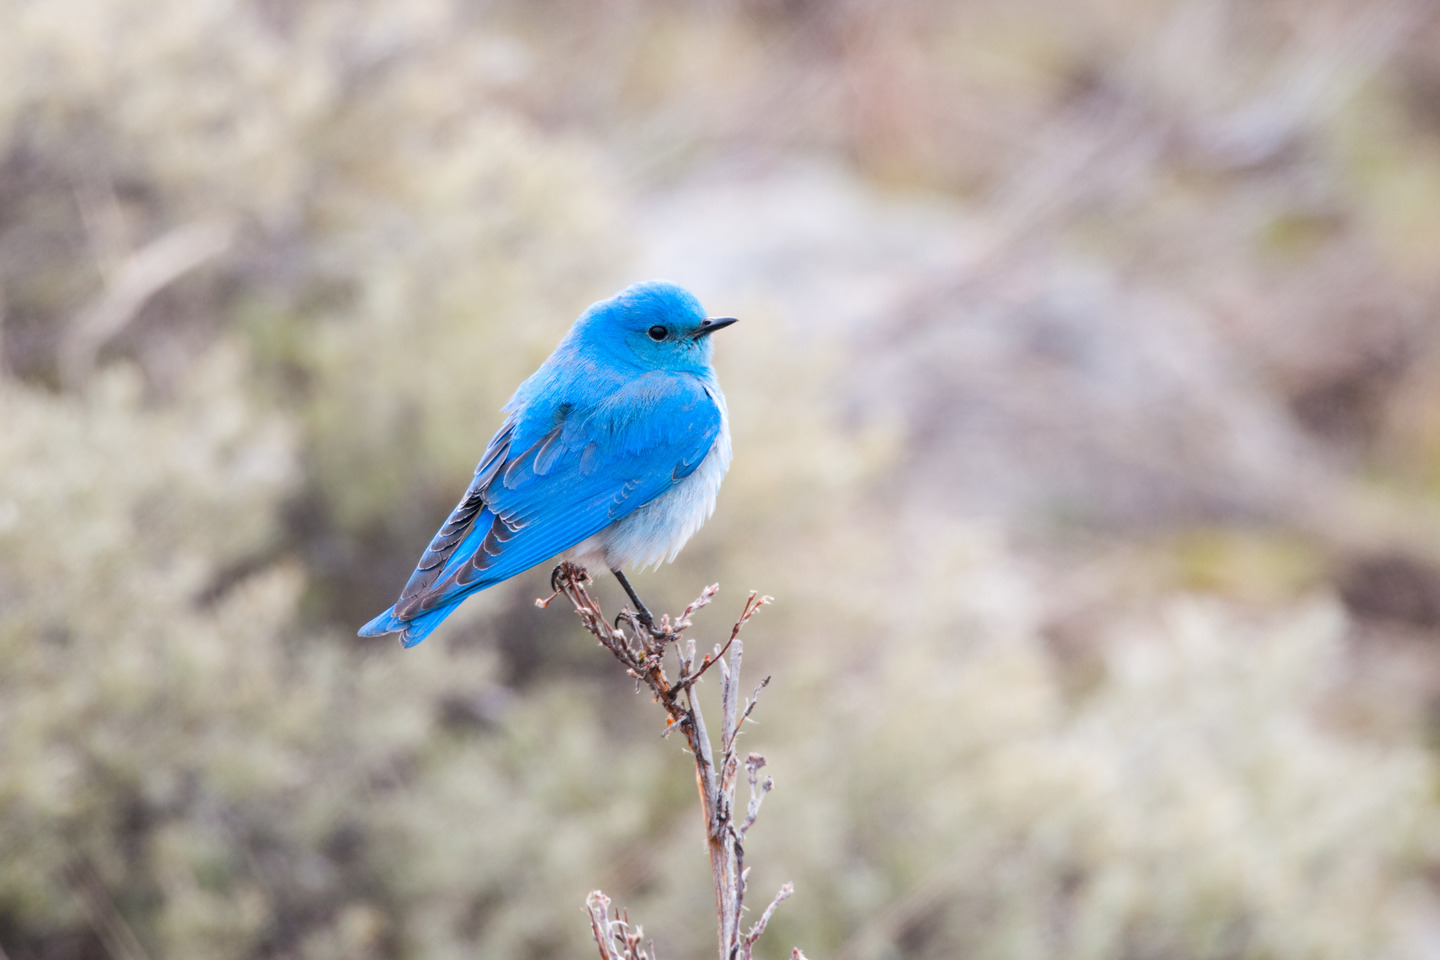 The mountain bluebird - on which the Twitter logo is based.